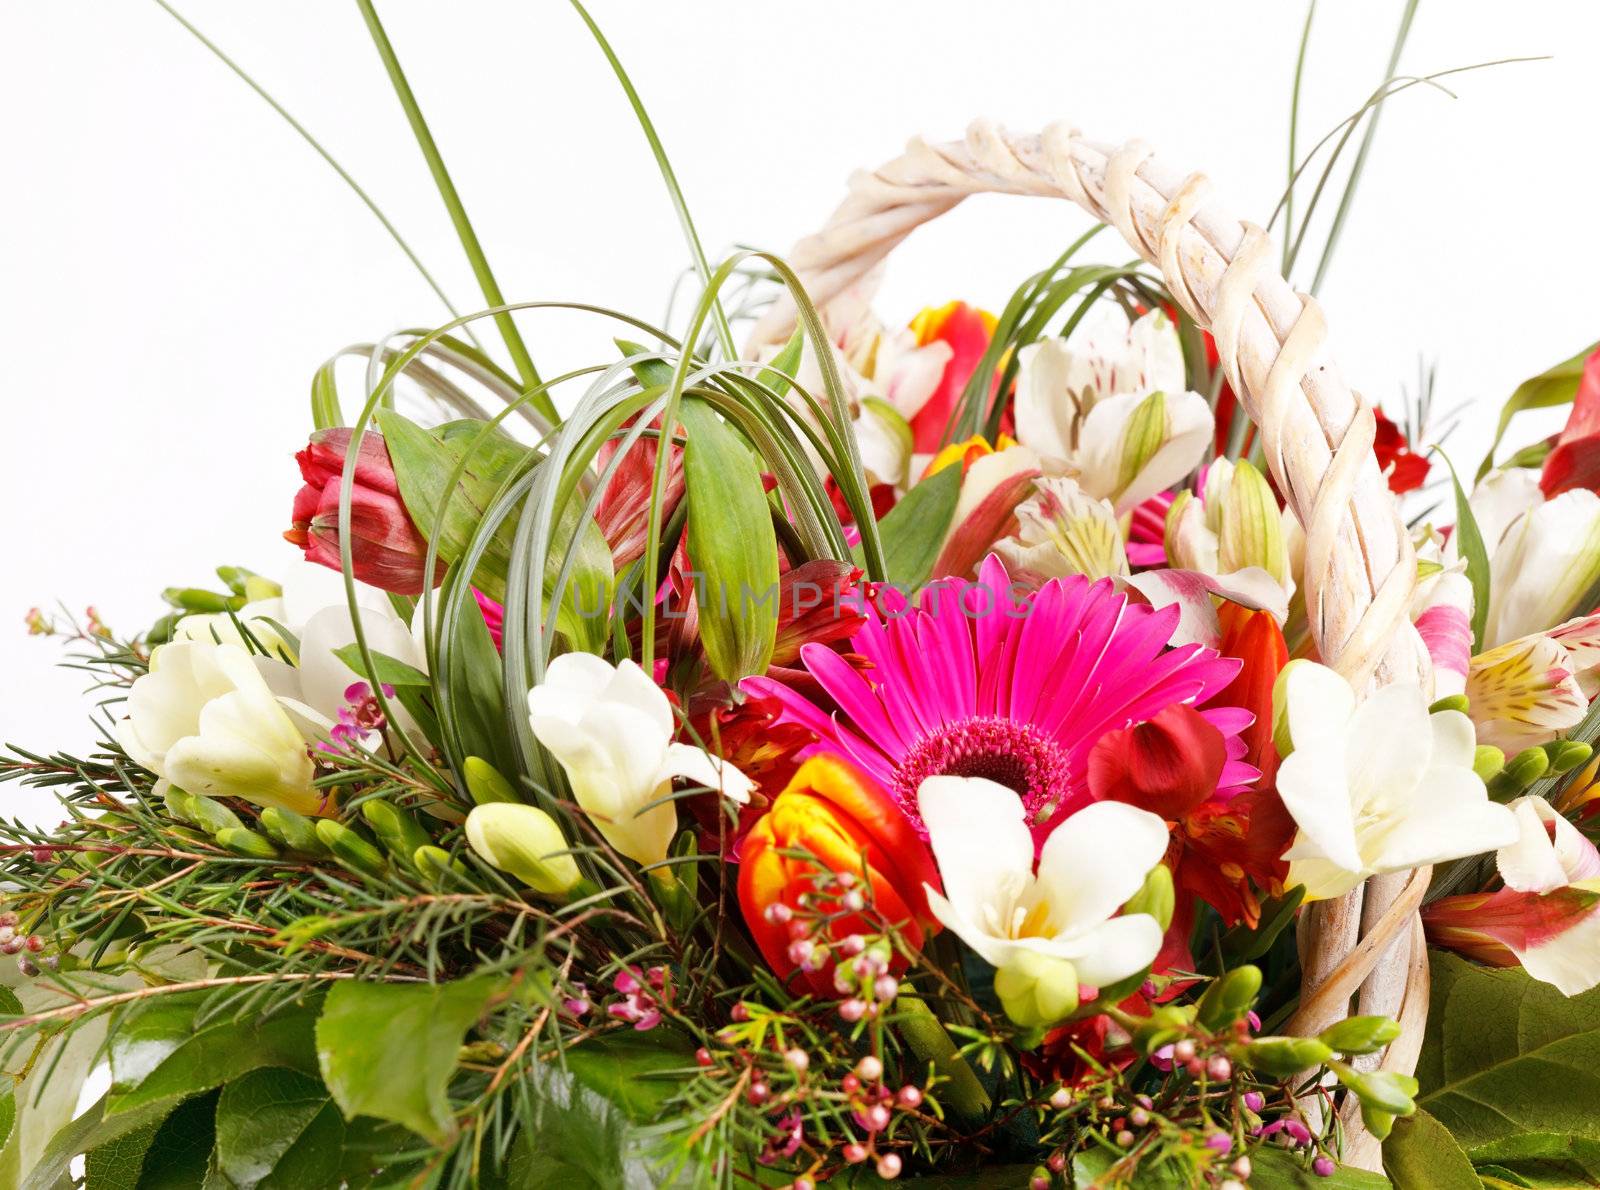 beautiful flowers in the basket  by shebeko